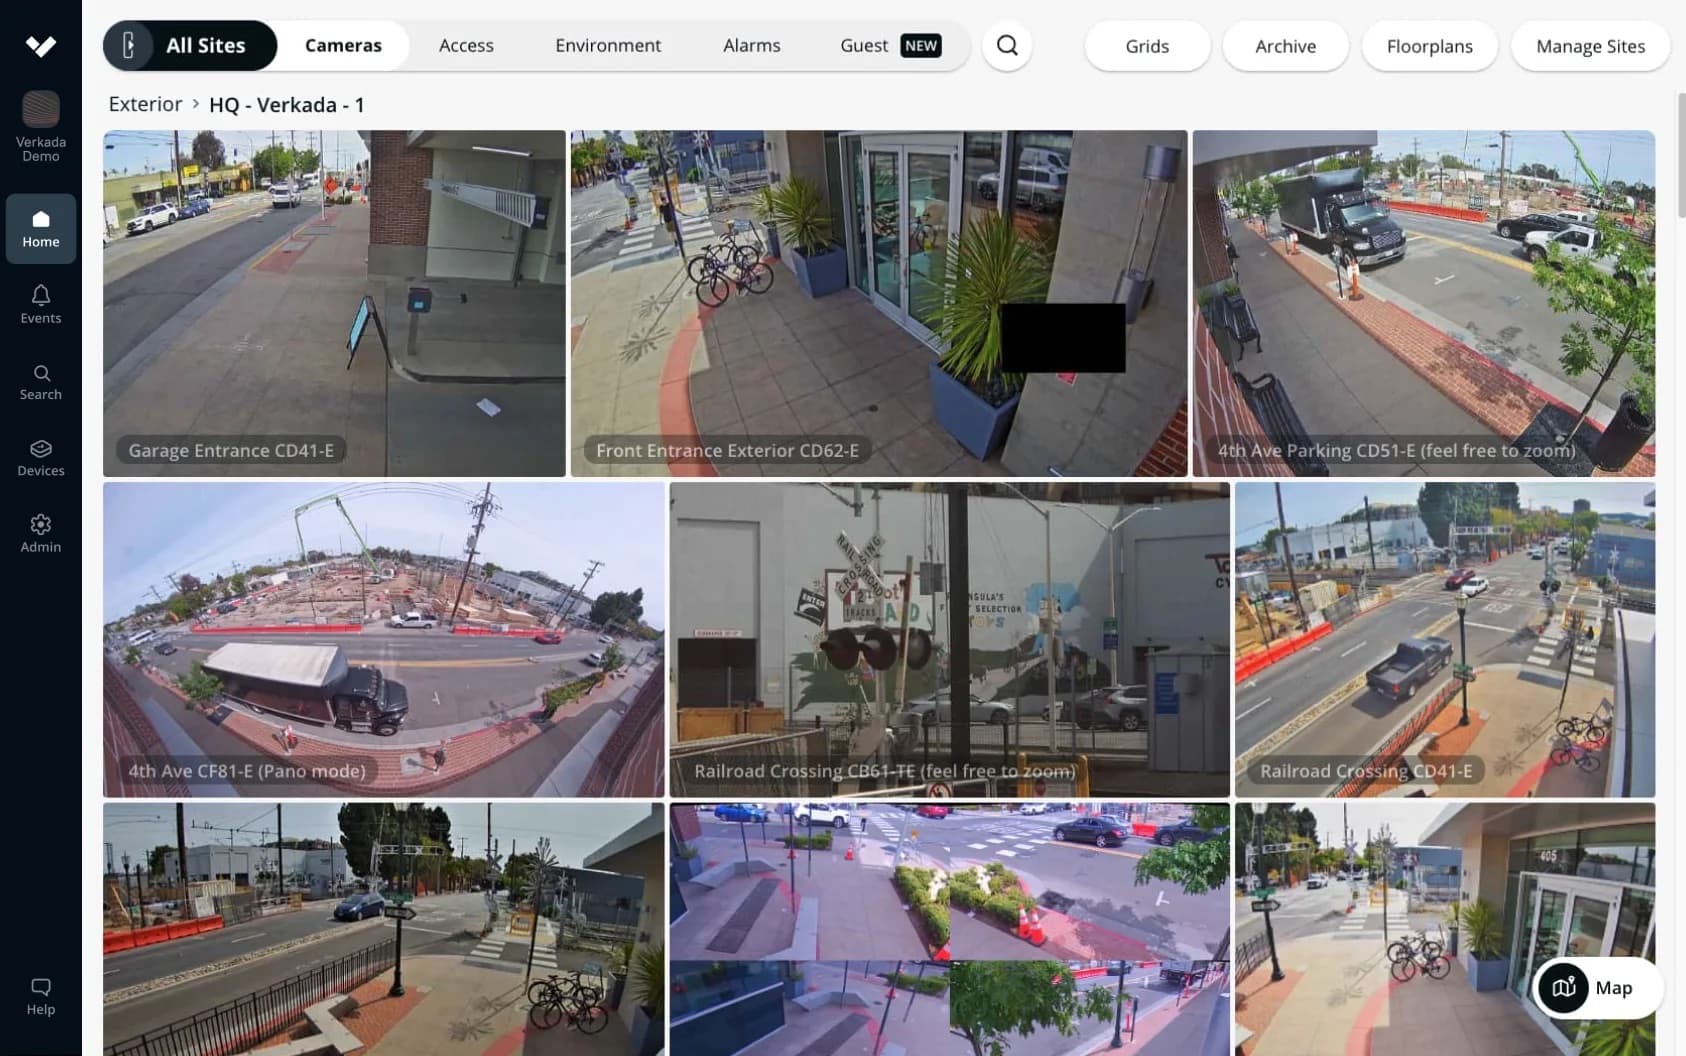 Remote monitoring with long range surveillance cameras outdoors